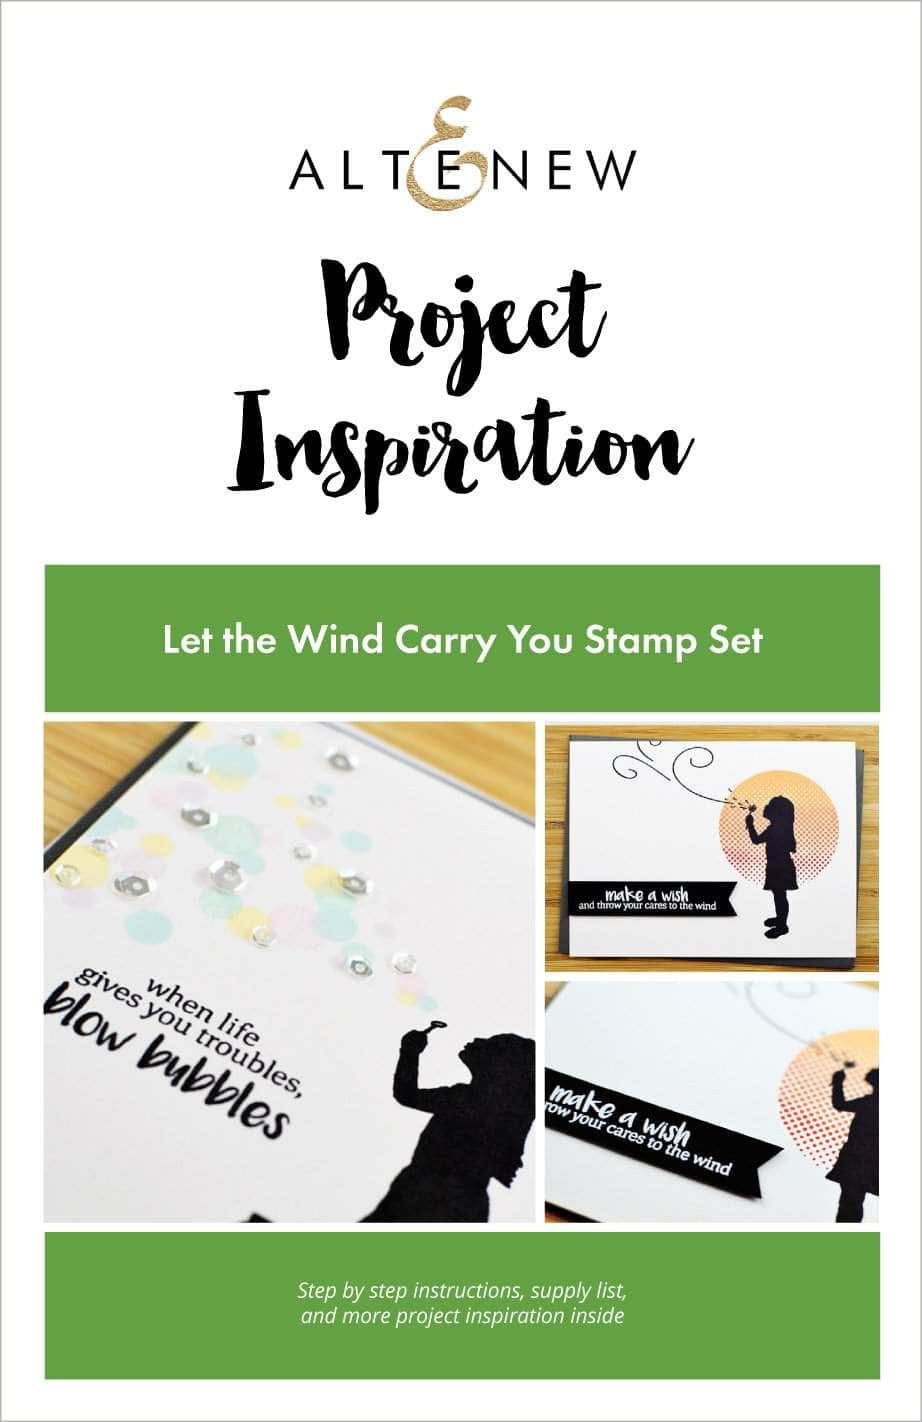 Printed Media Let the Wind Carry You Inspiration Guide